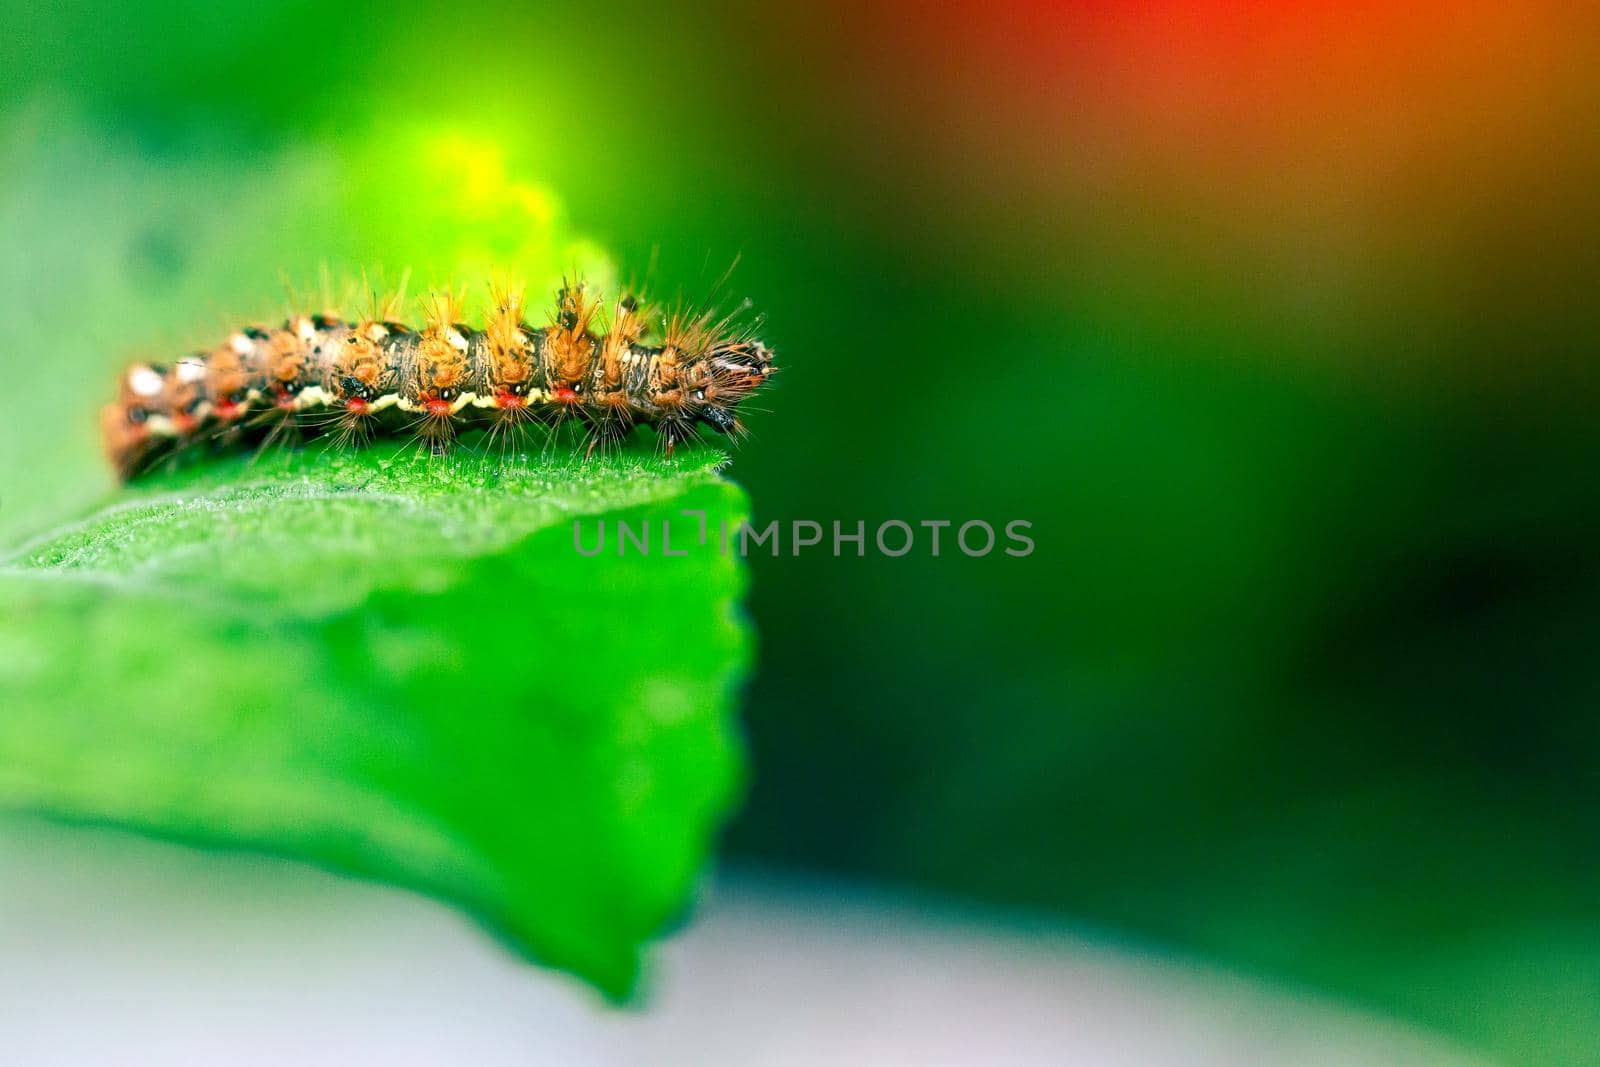 Caterpillar on a green leaf by clusterx